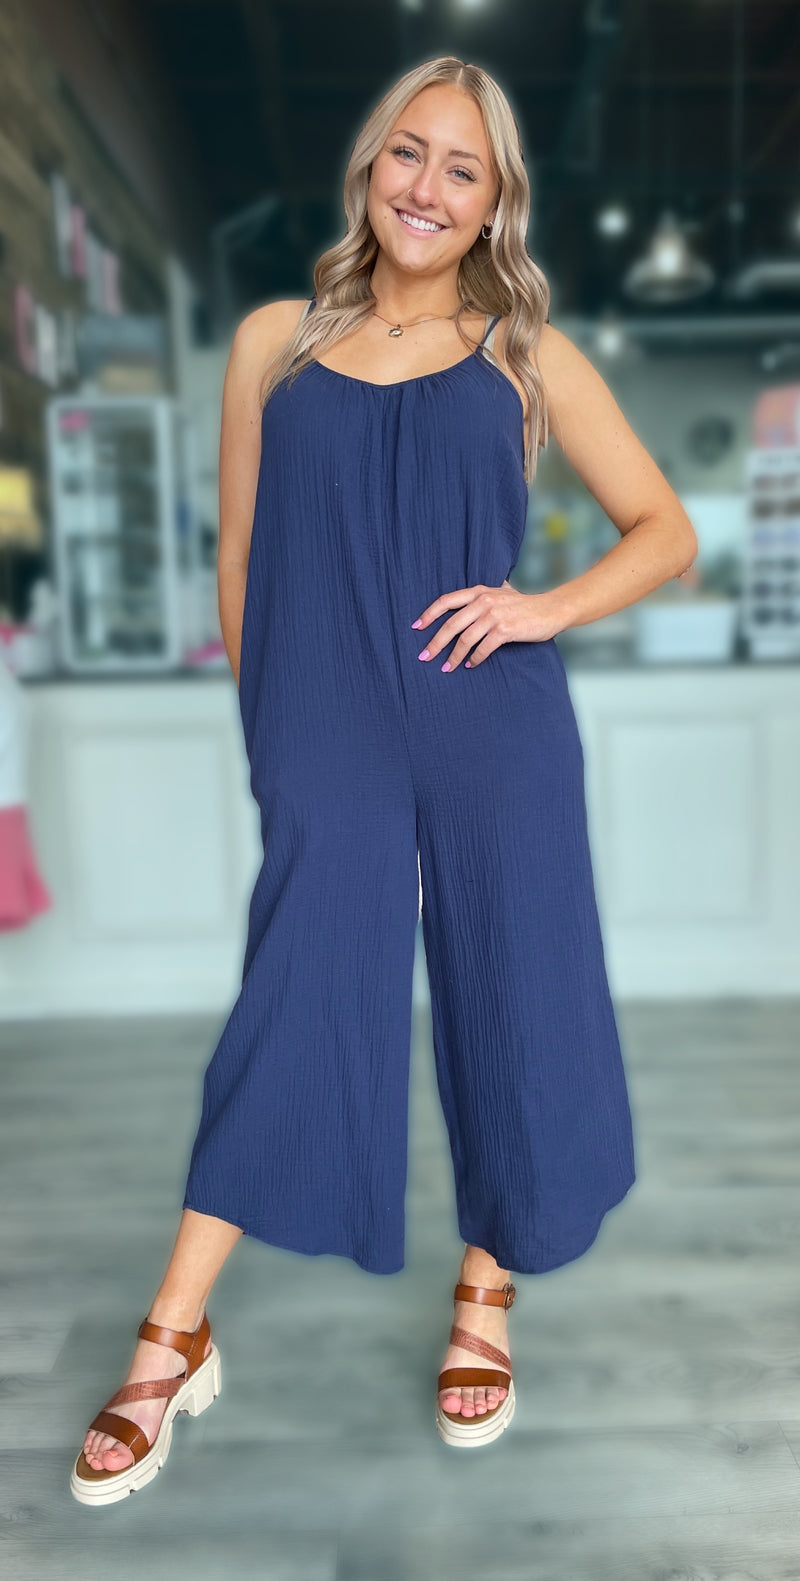 The Flared Jumpsuit in Indigo Dream by Z Supply